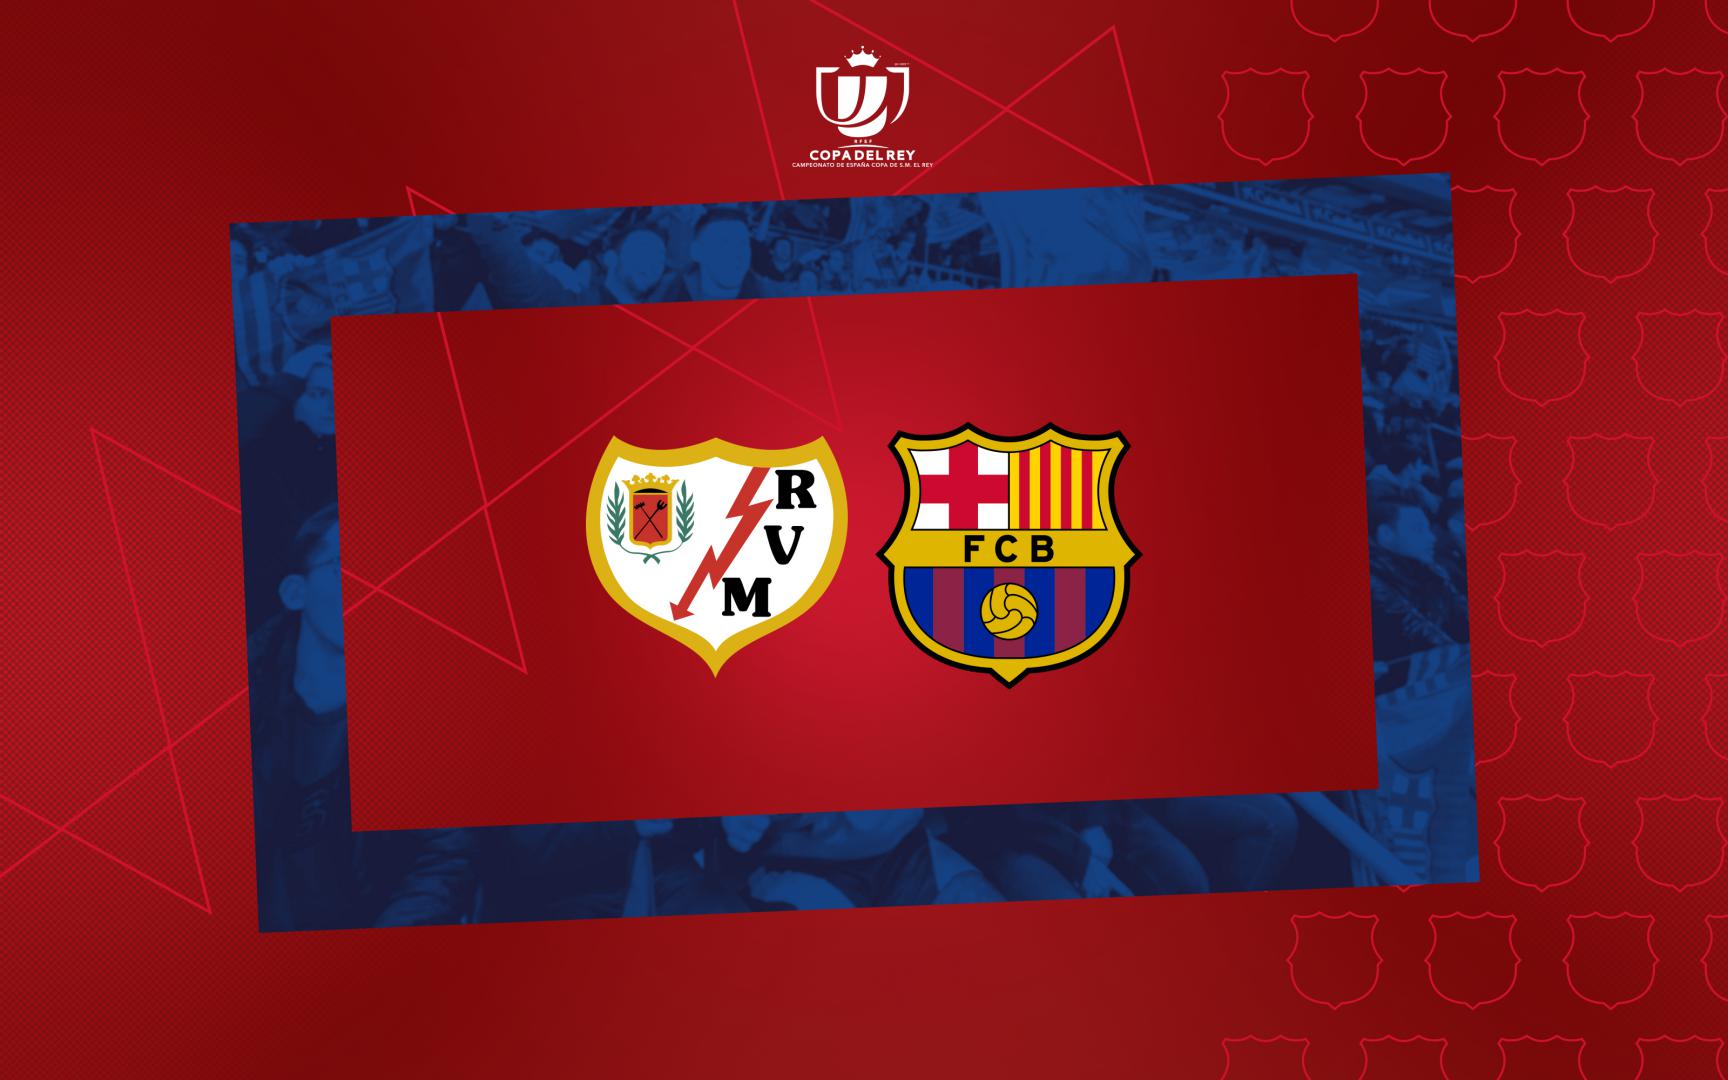 FC Barcelona to face Rayo Vallecano in the Last 16 of the Copa del Rey